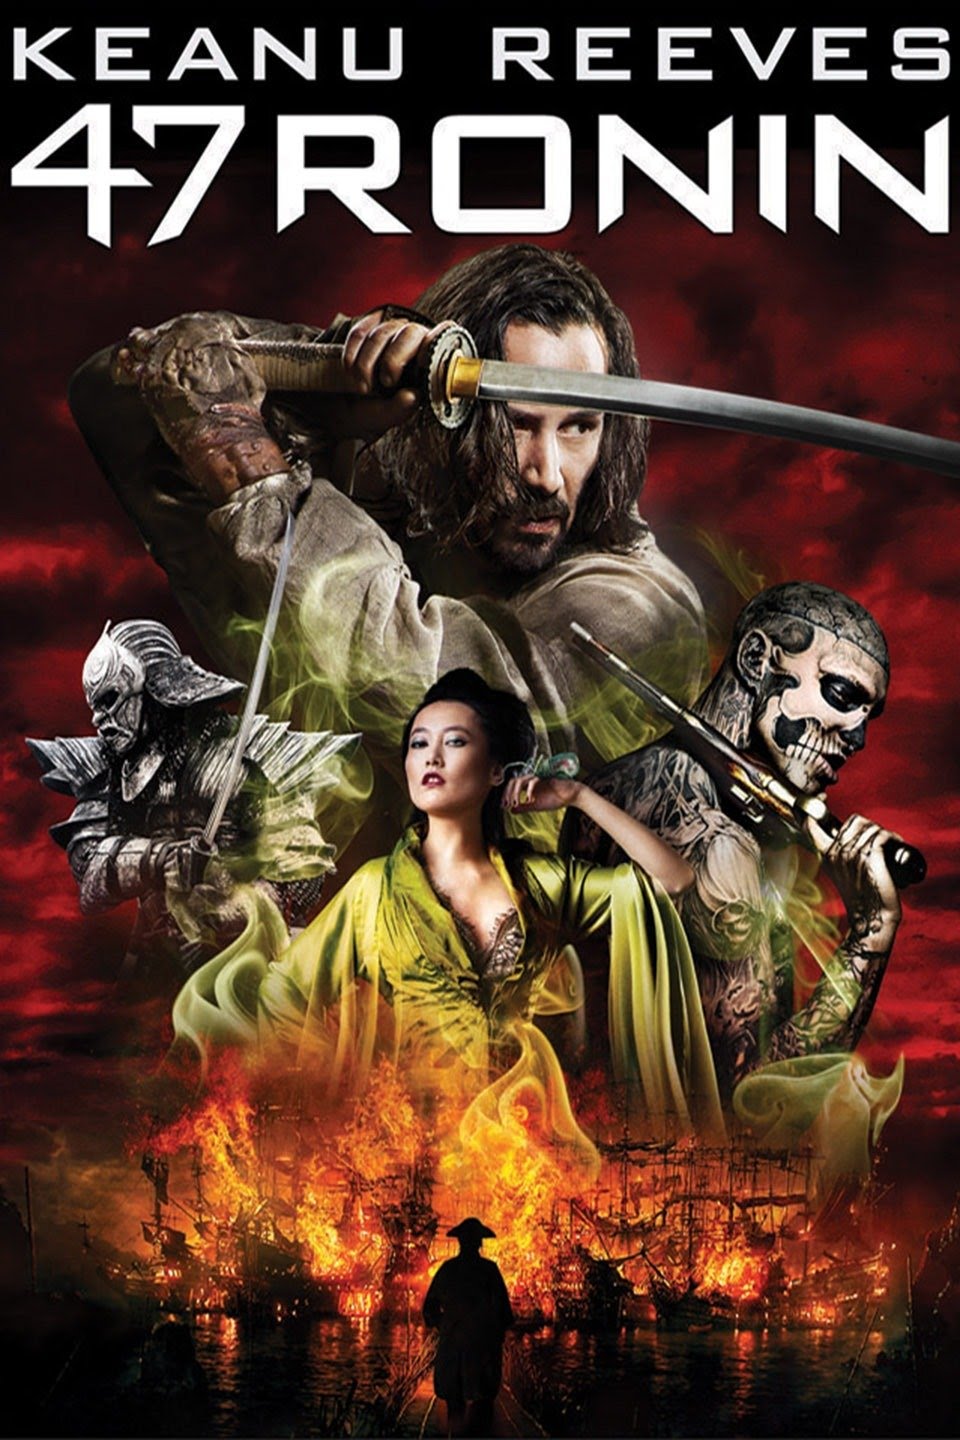 47 Ronin (2013) Vudu or Movies Anywhere HD redemption only